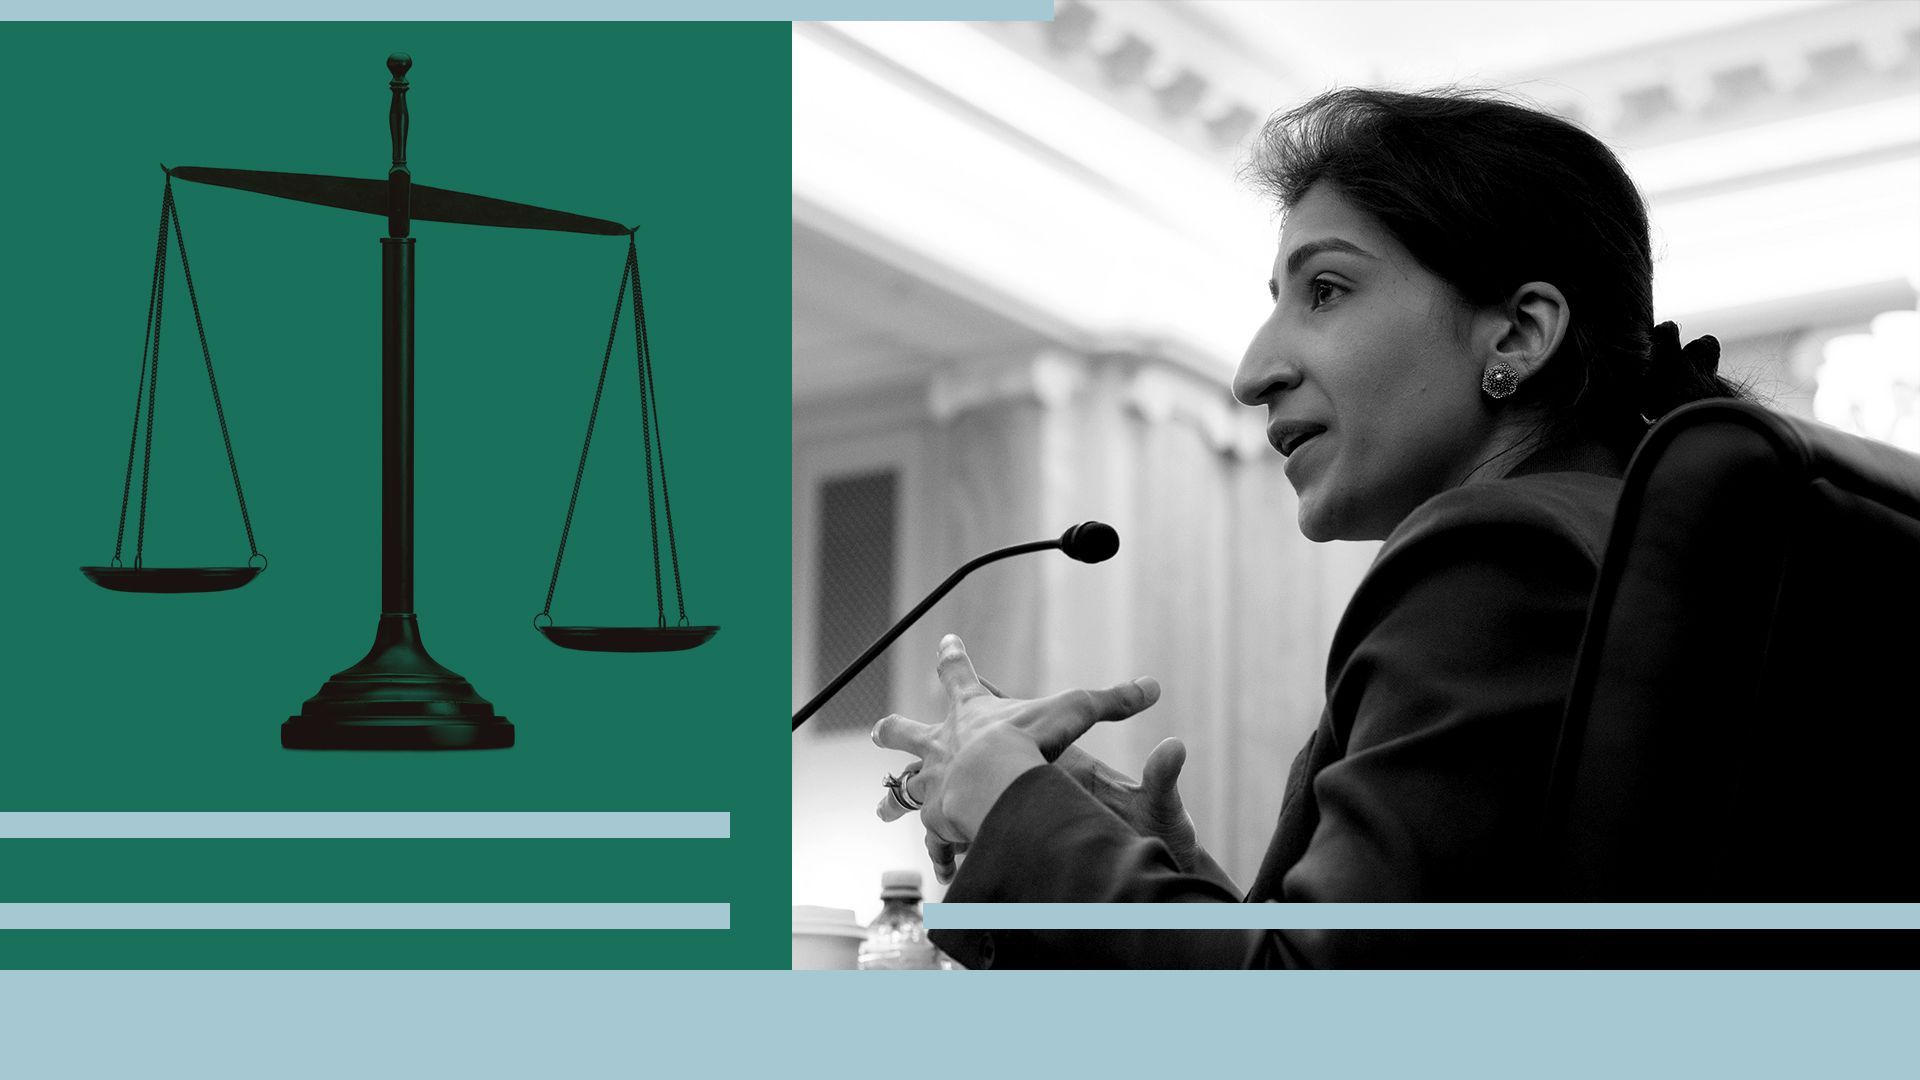 Photo illustration of FTC Chair Lina Khan and the scales of justice